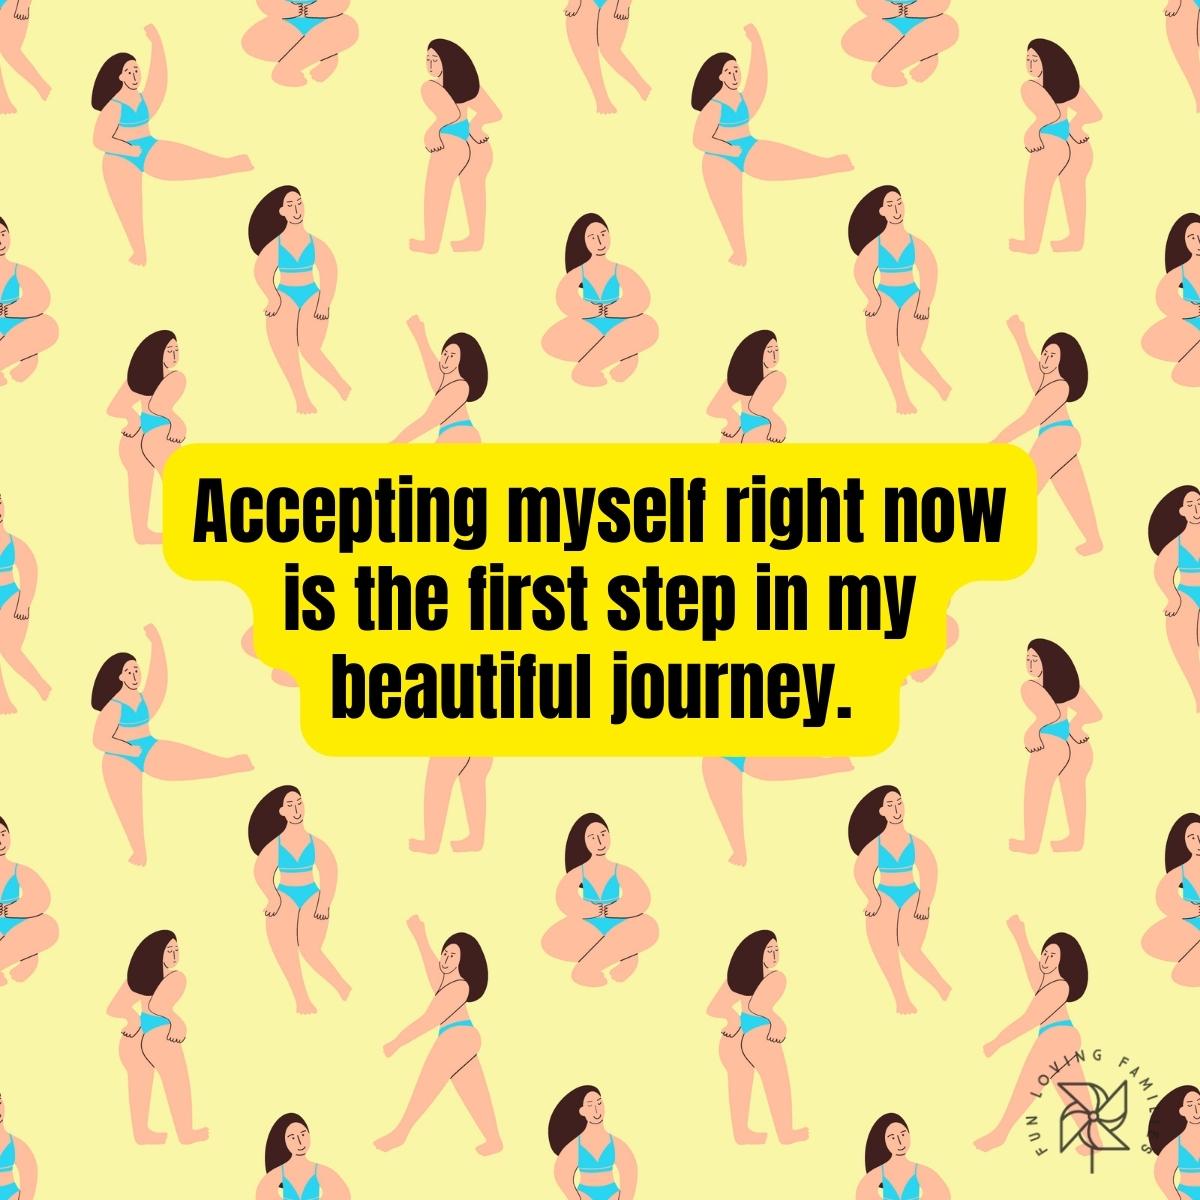 Accepting myself right now is the first step in my beautiful journey affirmation